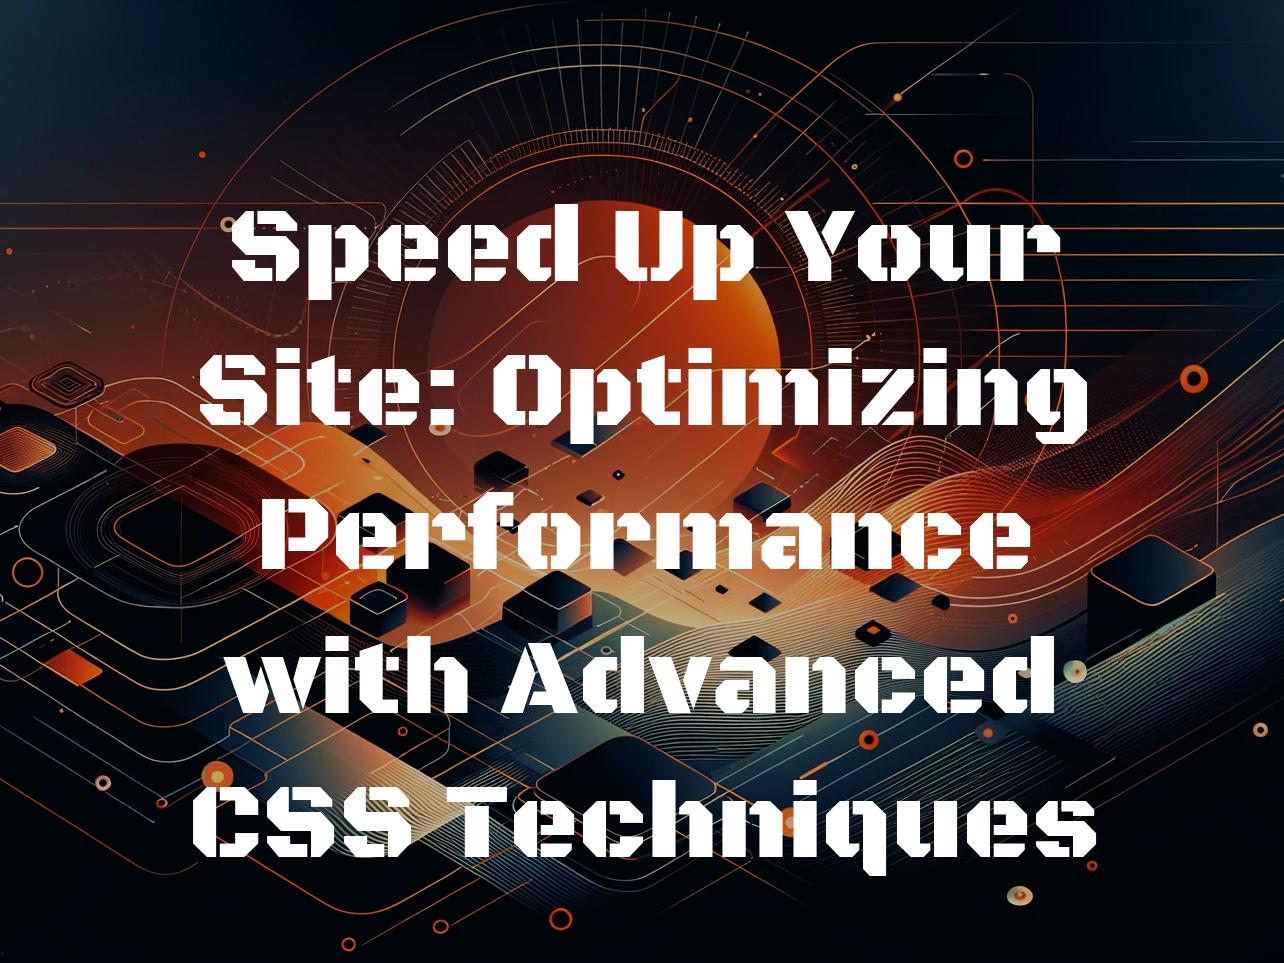 Speed Up Your Site: Optimizing Performance with Advanced CSS Techniques